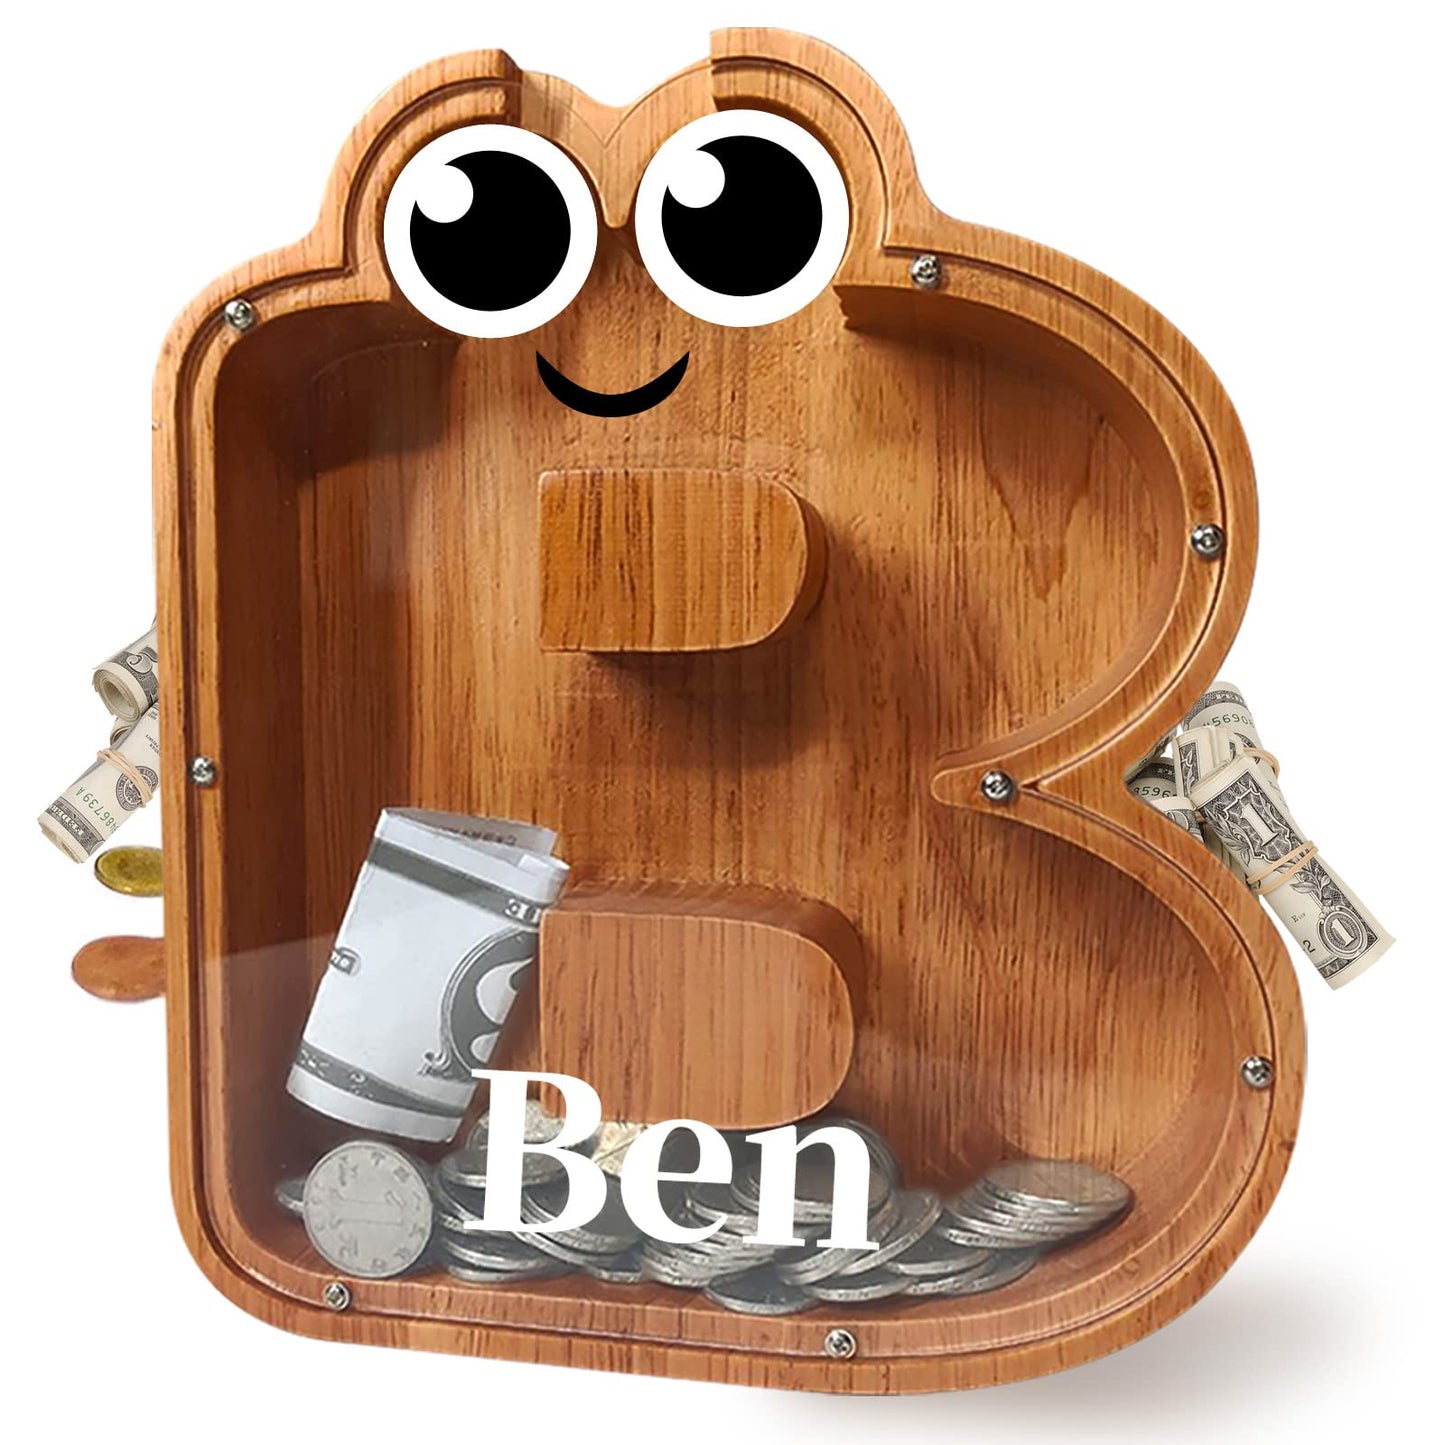 Wooden Piggy Bank, Personalized Letters Coin Bank Piggy Bank(9.1in, Laser Engraving), Money Box Wooden Piggy Bank Gift for Kids, Christmas Birthday Gift Home Decoration. (B, Non-Custom)